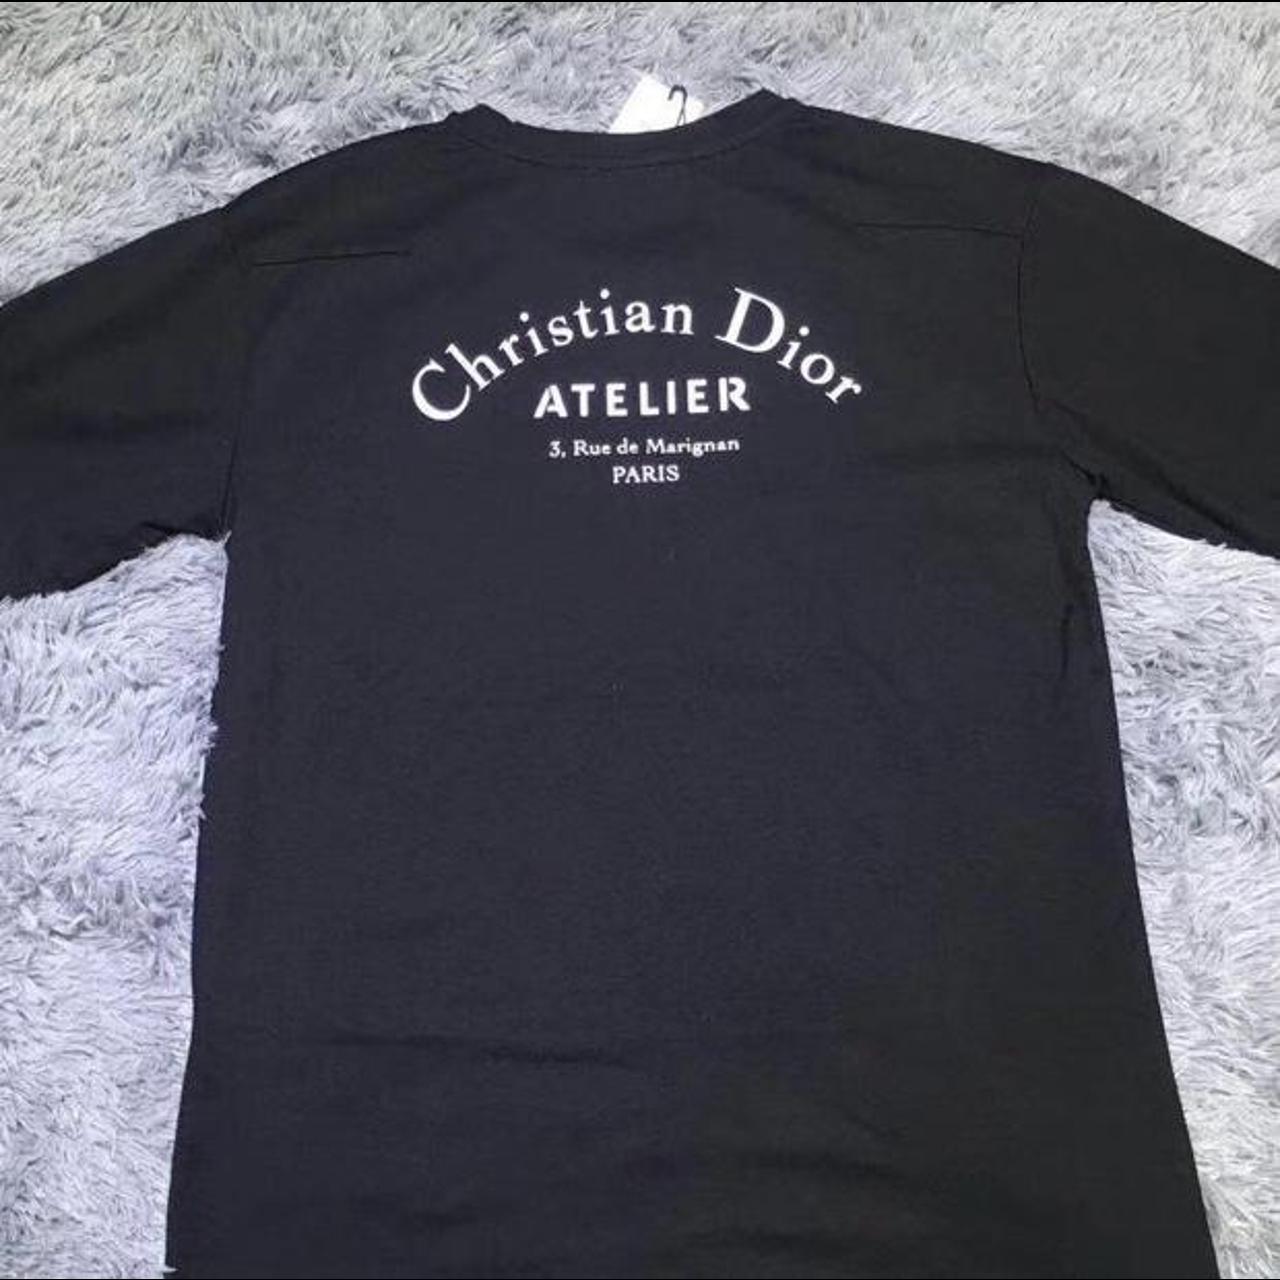 Dior atelier top real authentic - Depop